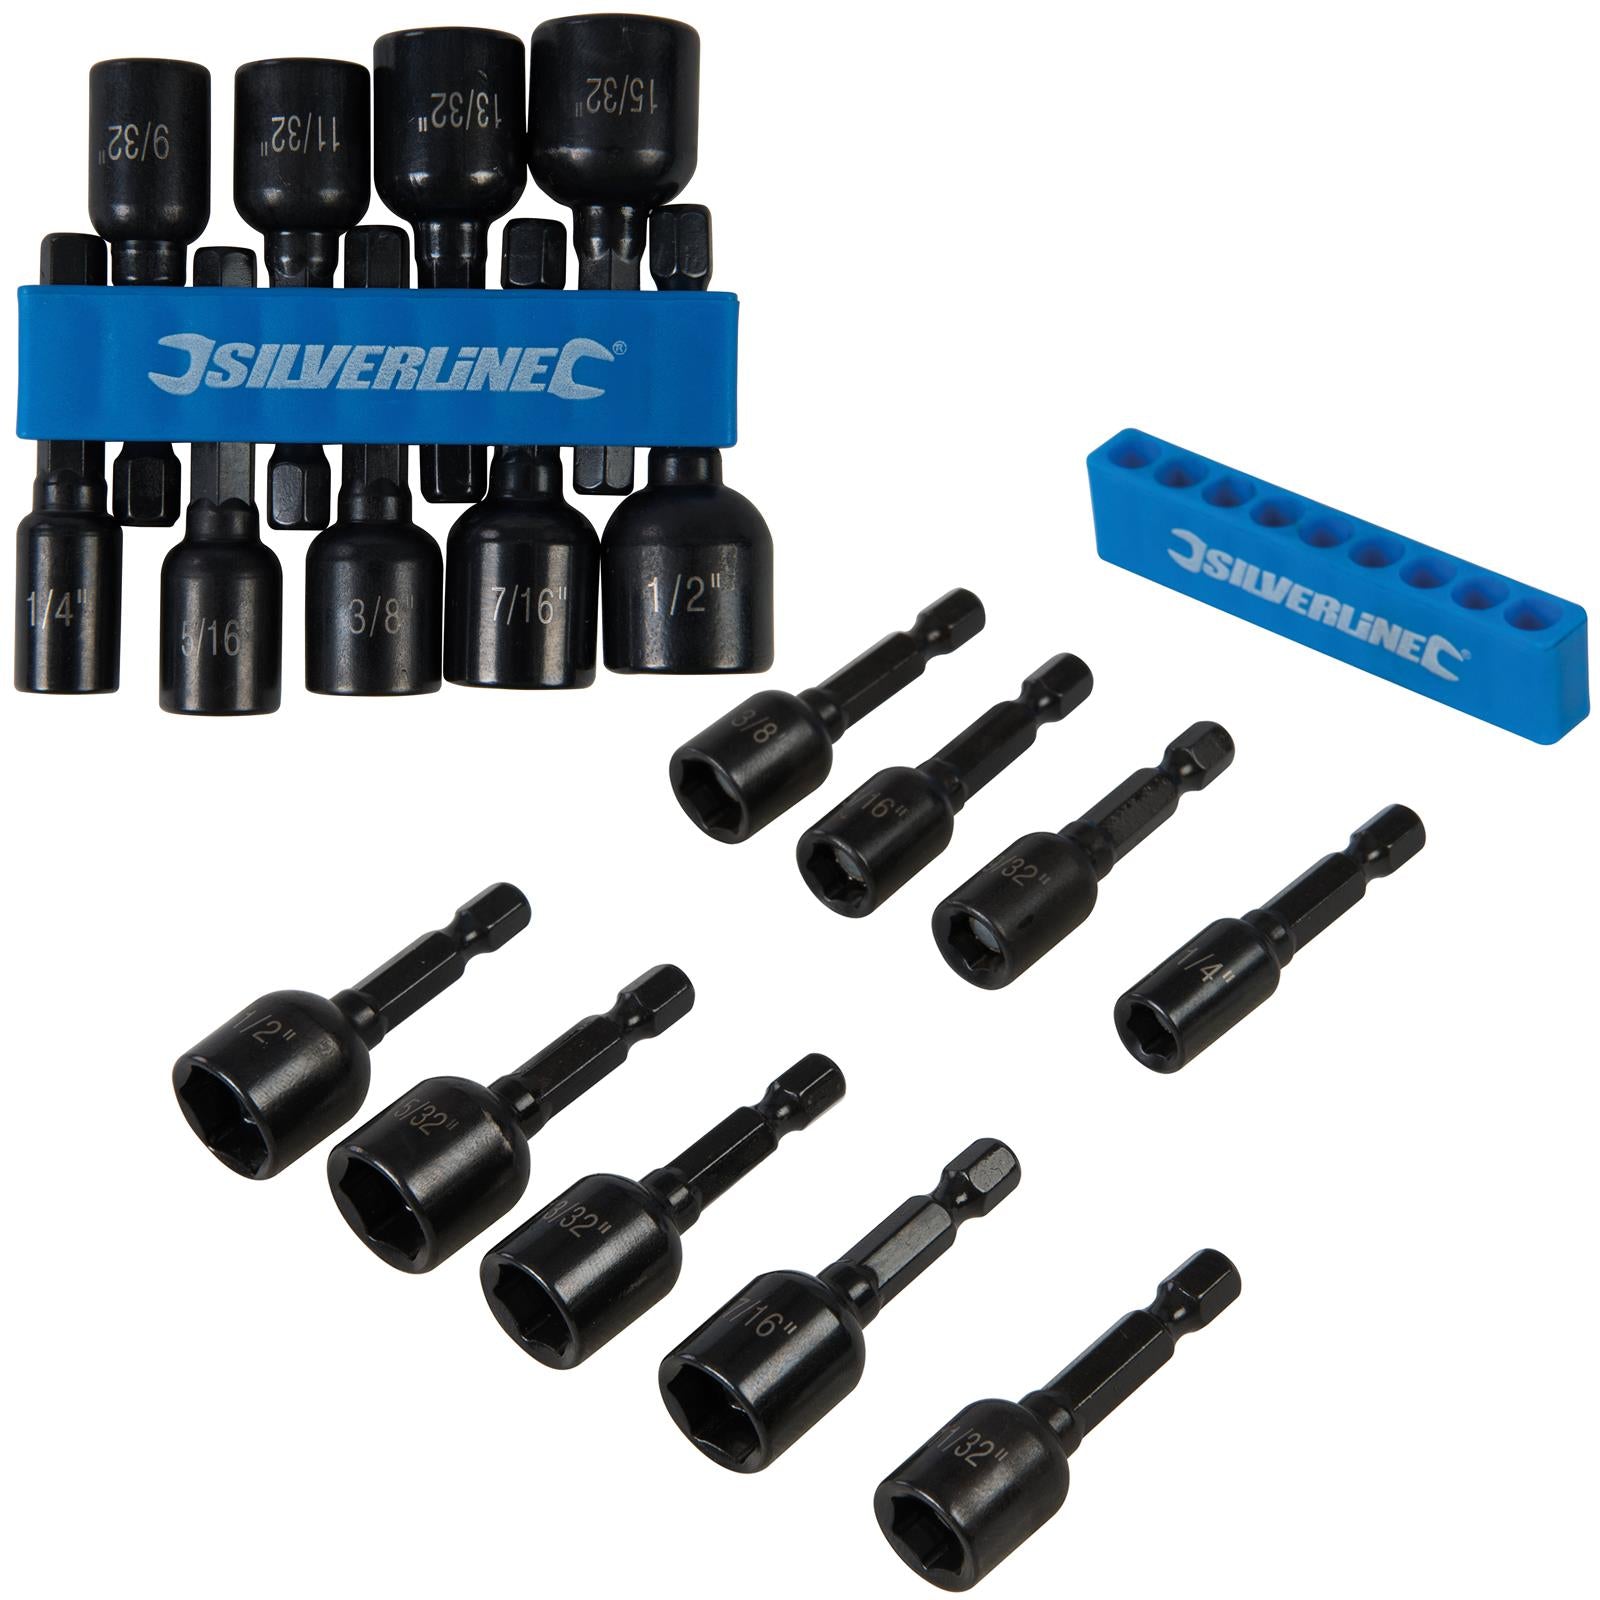 Silverline 9 Piece Imperial Magnetic Nut Driver Set 1/4"-1/2" Hex Drill Socket Adaptor